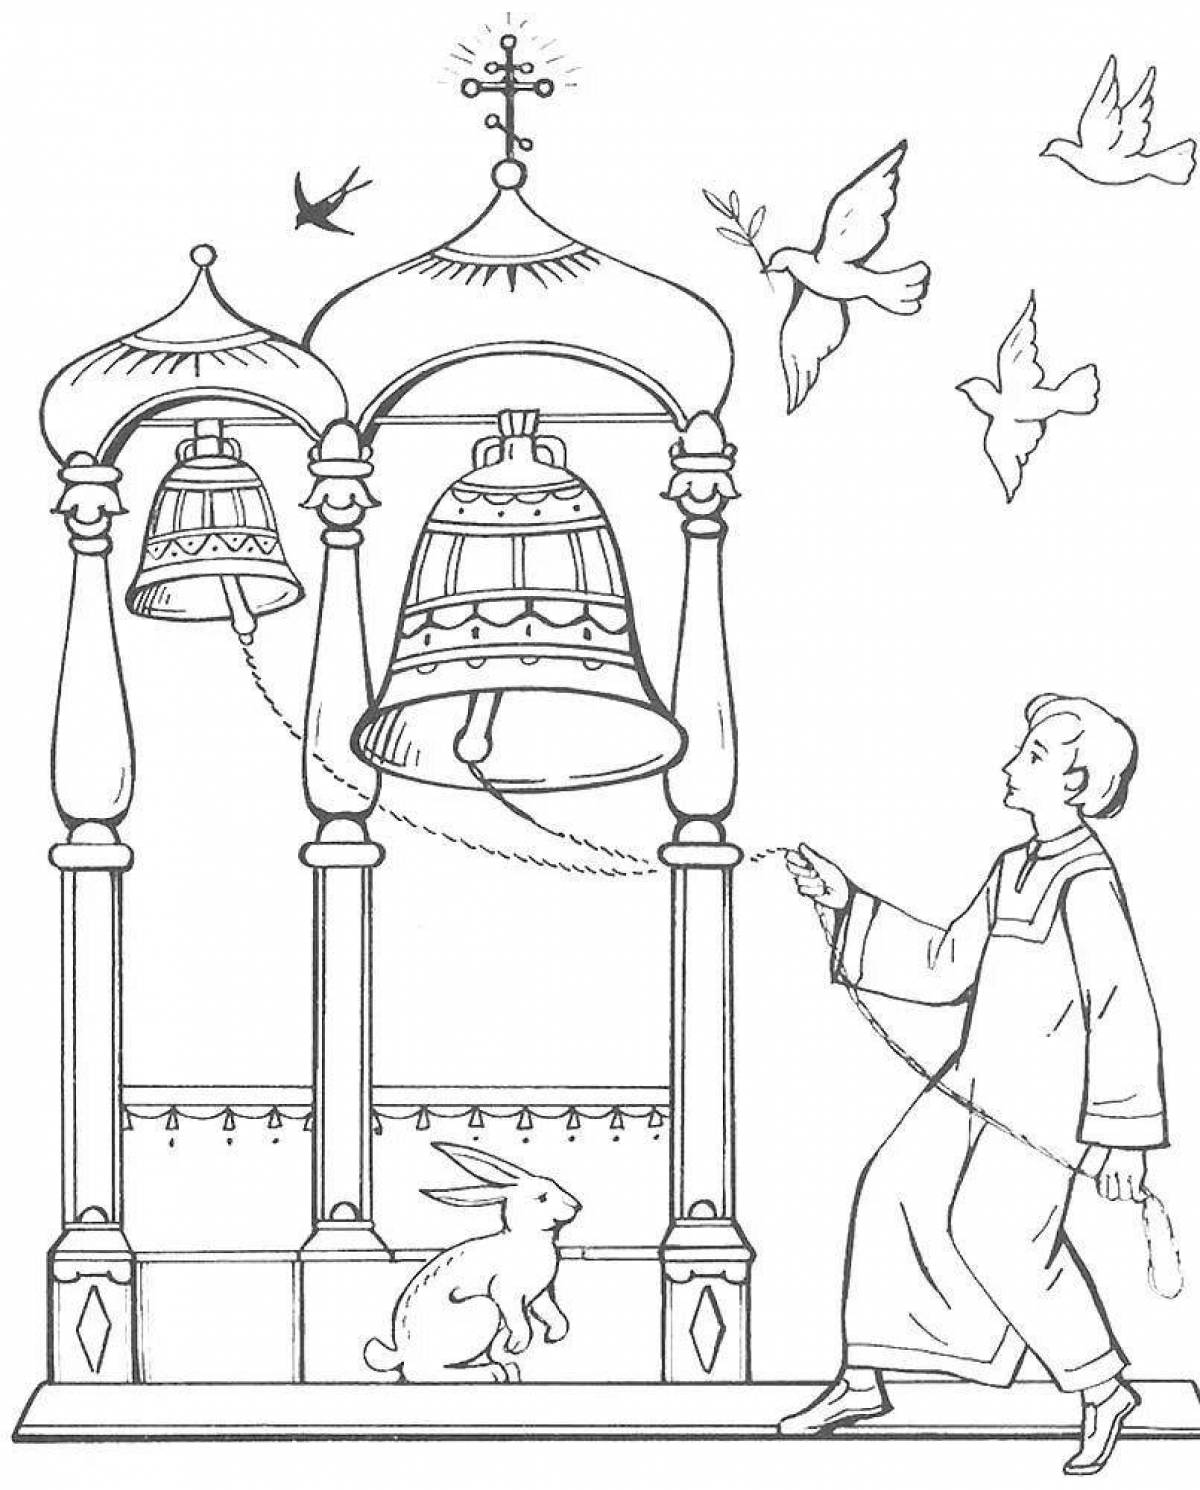 Shining Orthodox Church coloring book for kids